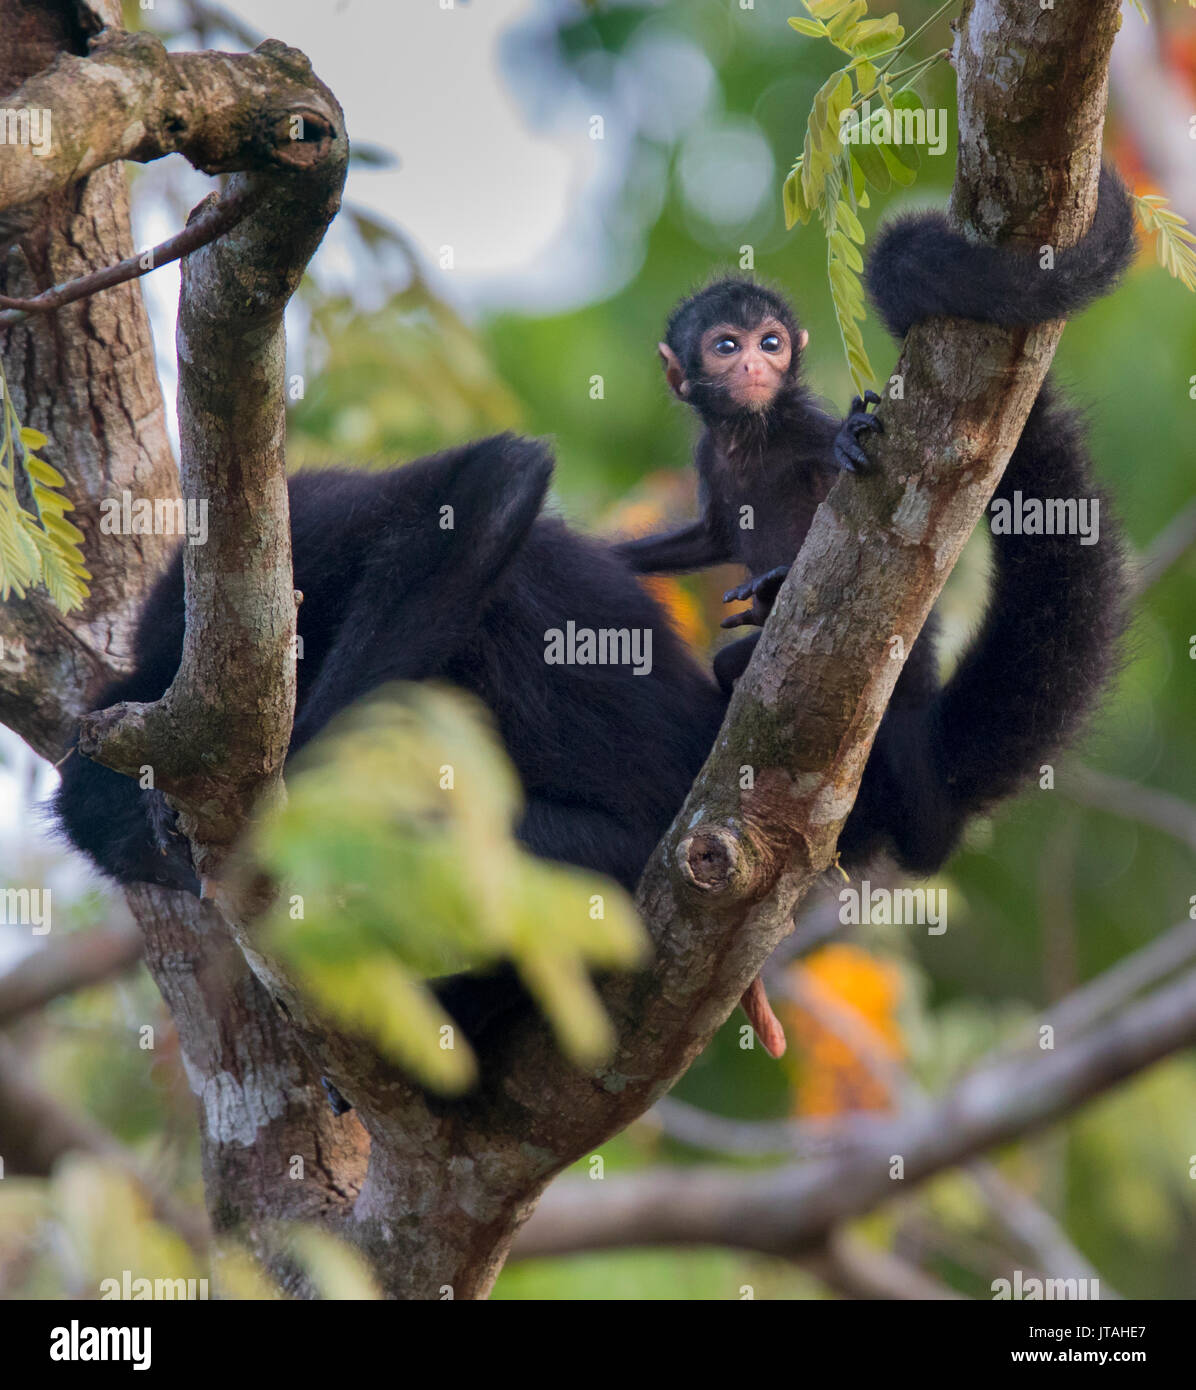 Black-headed Spider Monkey (Ateles fusciceps) mother and young, SoberanÃ­a National Park, Panama, Central America. Critically endangered species. Stock Photo